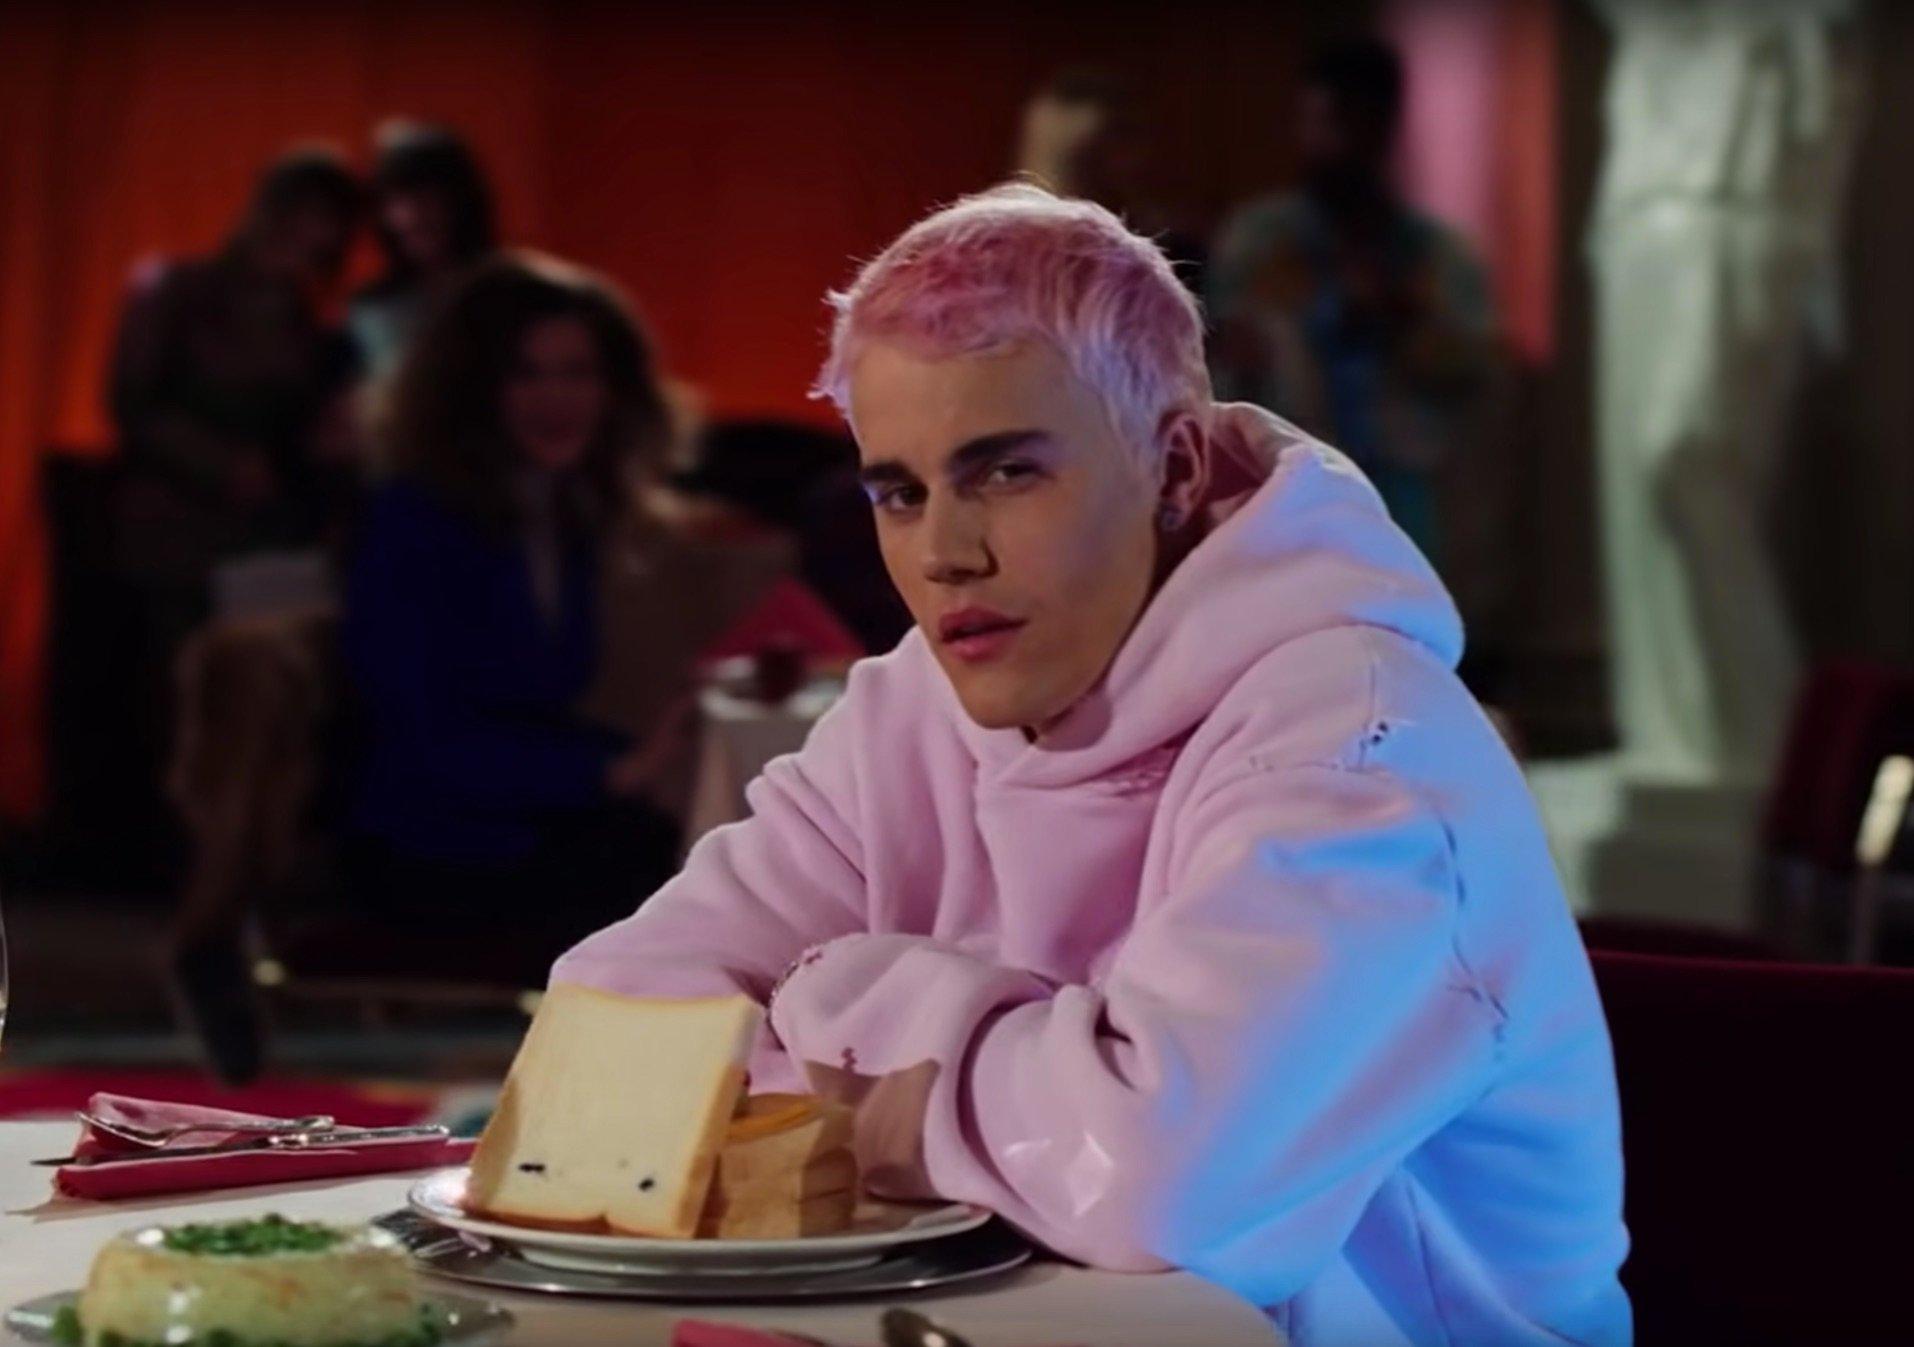 Justin Bieber's Flavorless Pivot to R&B, and 10 More New Songs